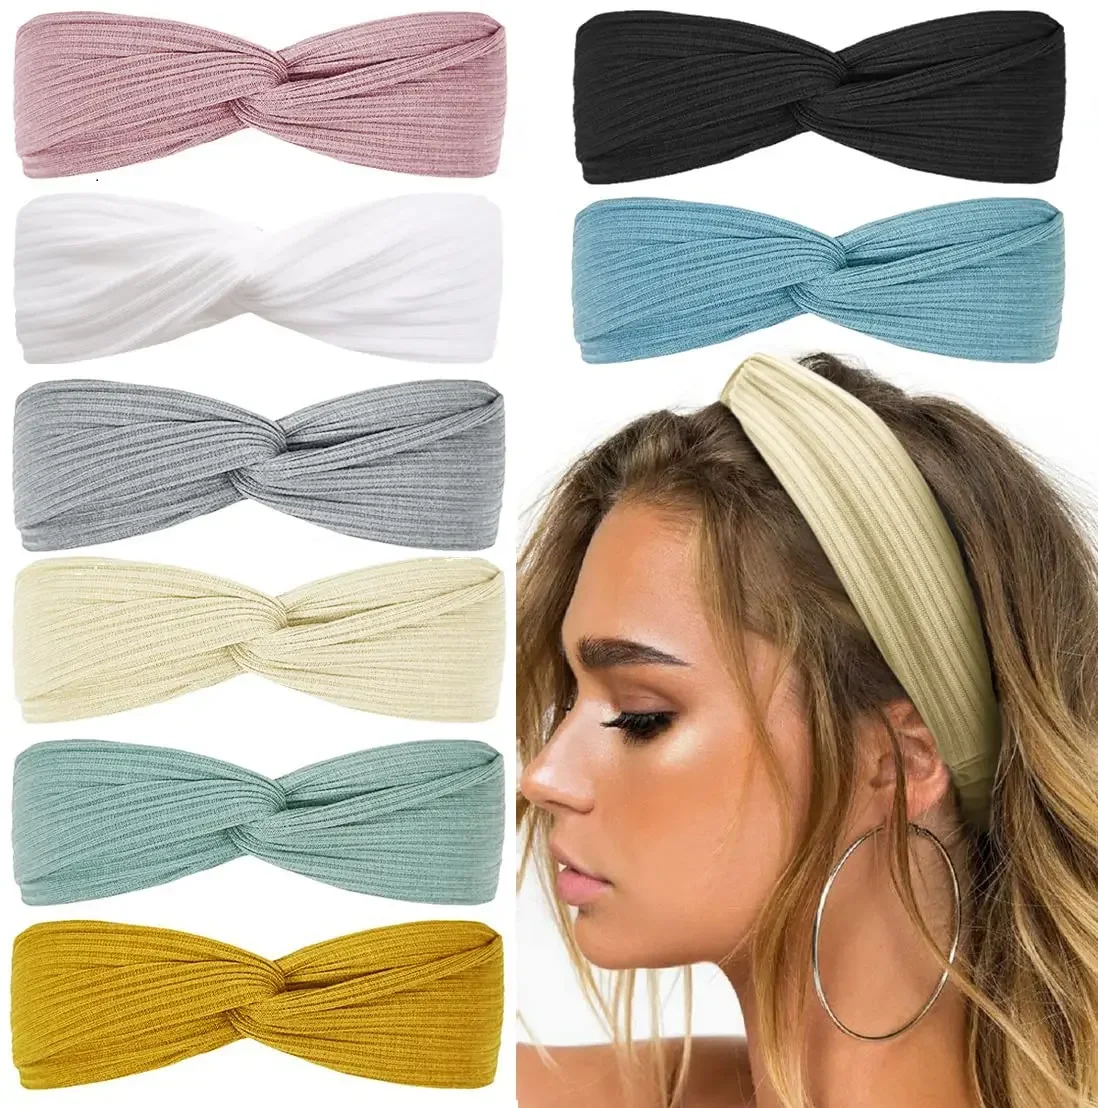 8Pcs Boho Head Bands for Women's Hair Non Slip Twist Hair Bands for Short Hair Fashion Summer Hair Accessories, Solid Color 8pcs metal spudger tools disassembly electronic motherboard non slip phone for bga cpu chips crowbar repair